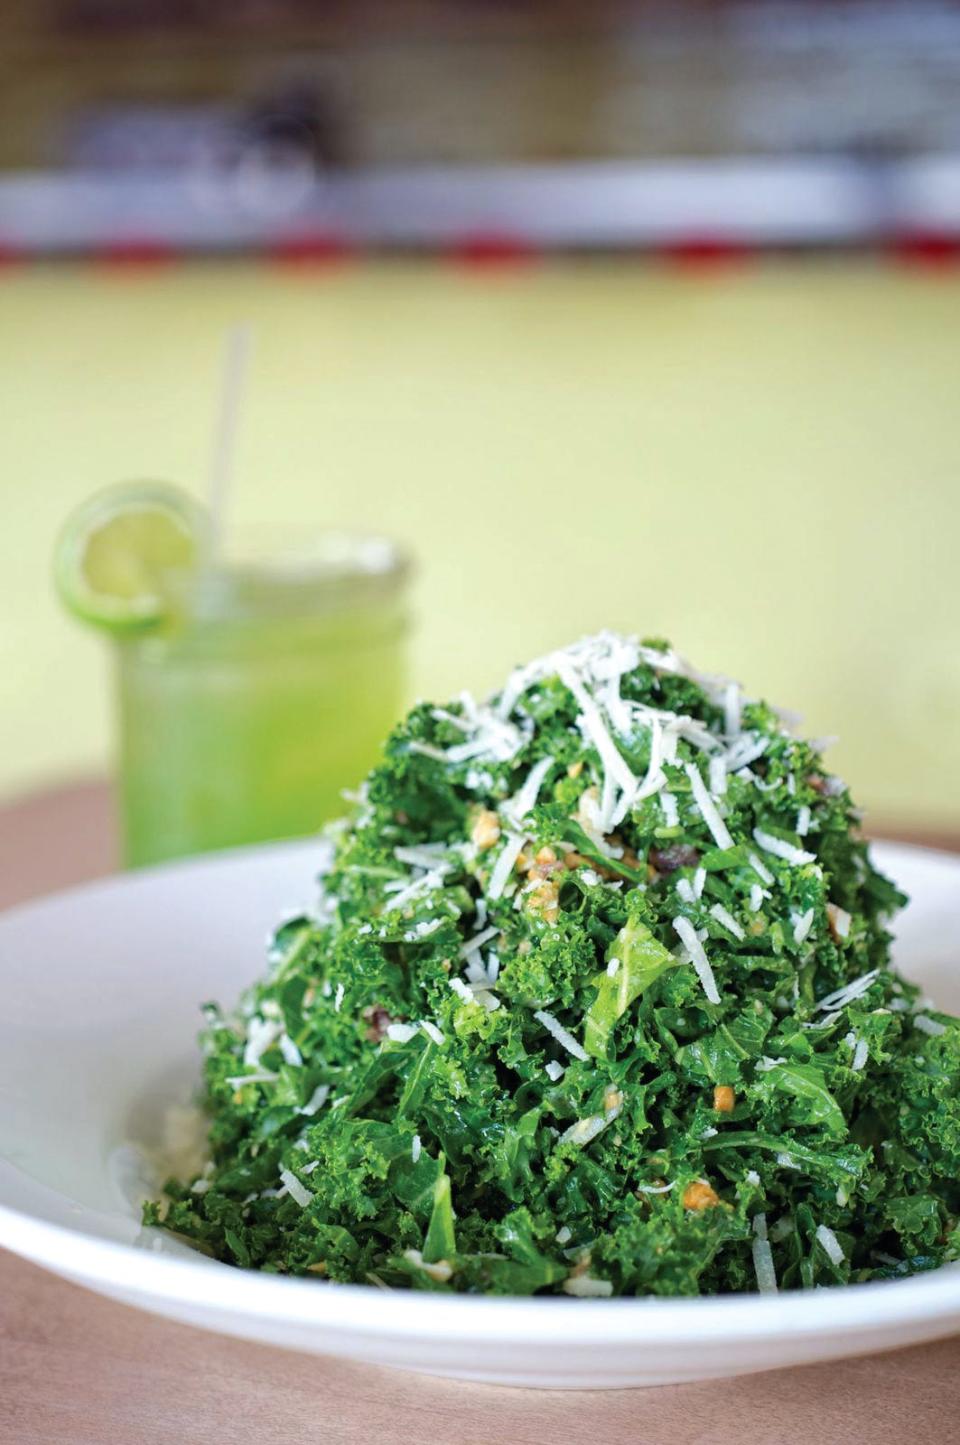 Vinaigrette off South Congress Avenue serves some of the best salads in town.